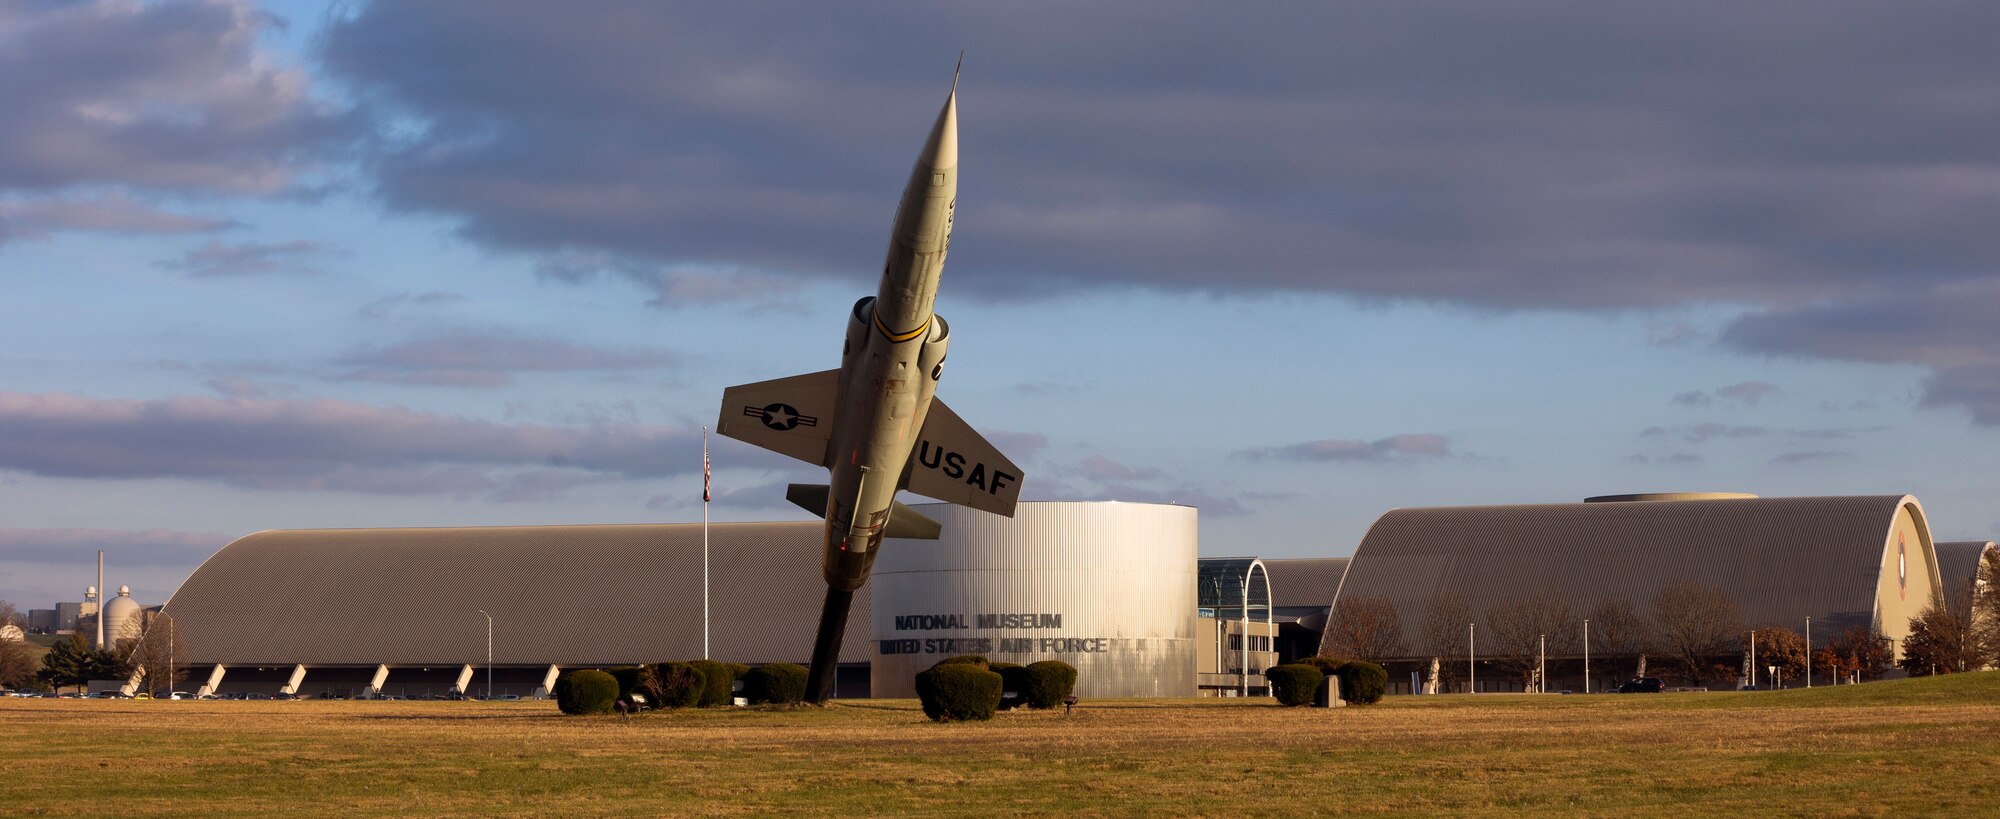 Exterior view of the National Museum of the United States Air Force features a Lockheed F-104 Starfighter.